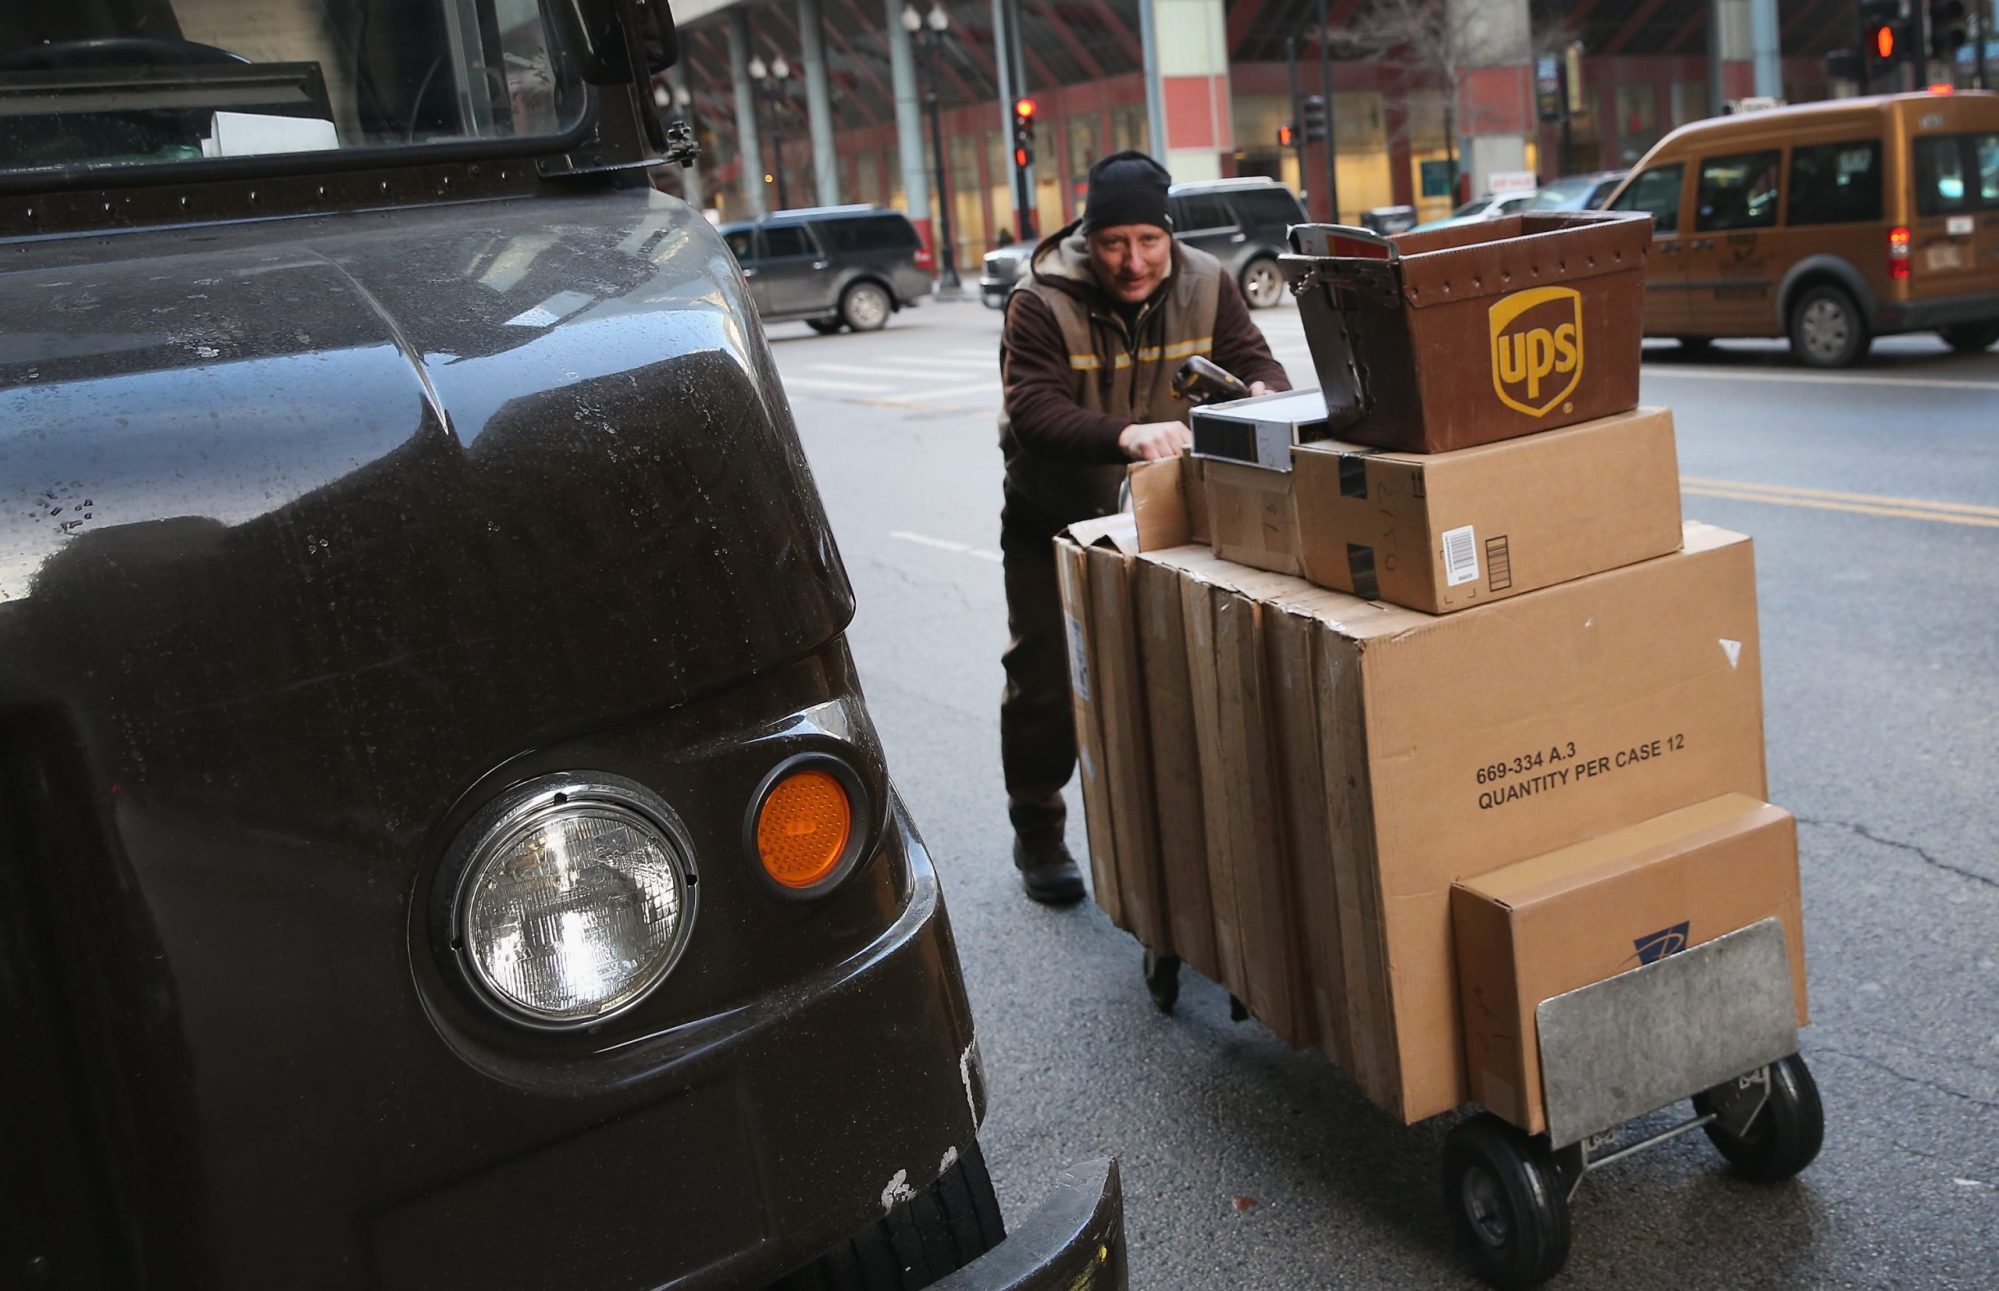 A UPS worker on a winter's day pushing a cart full of packages.